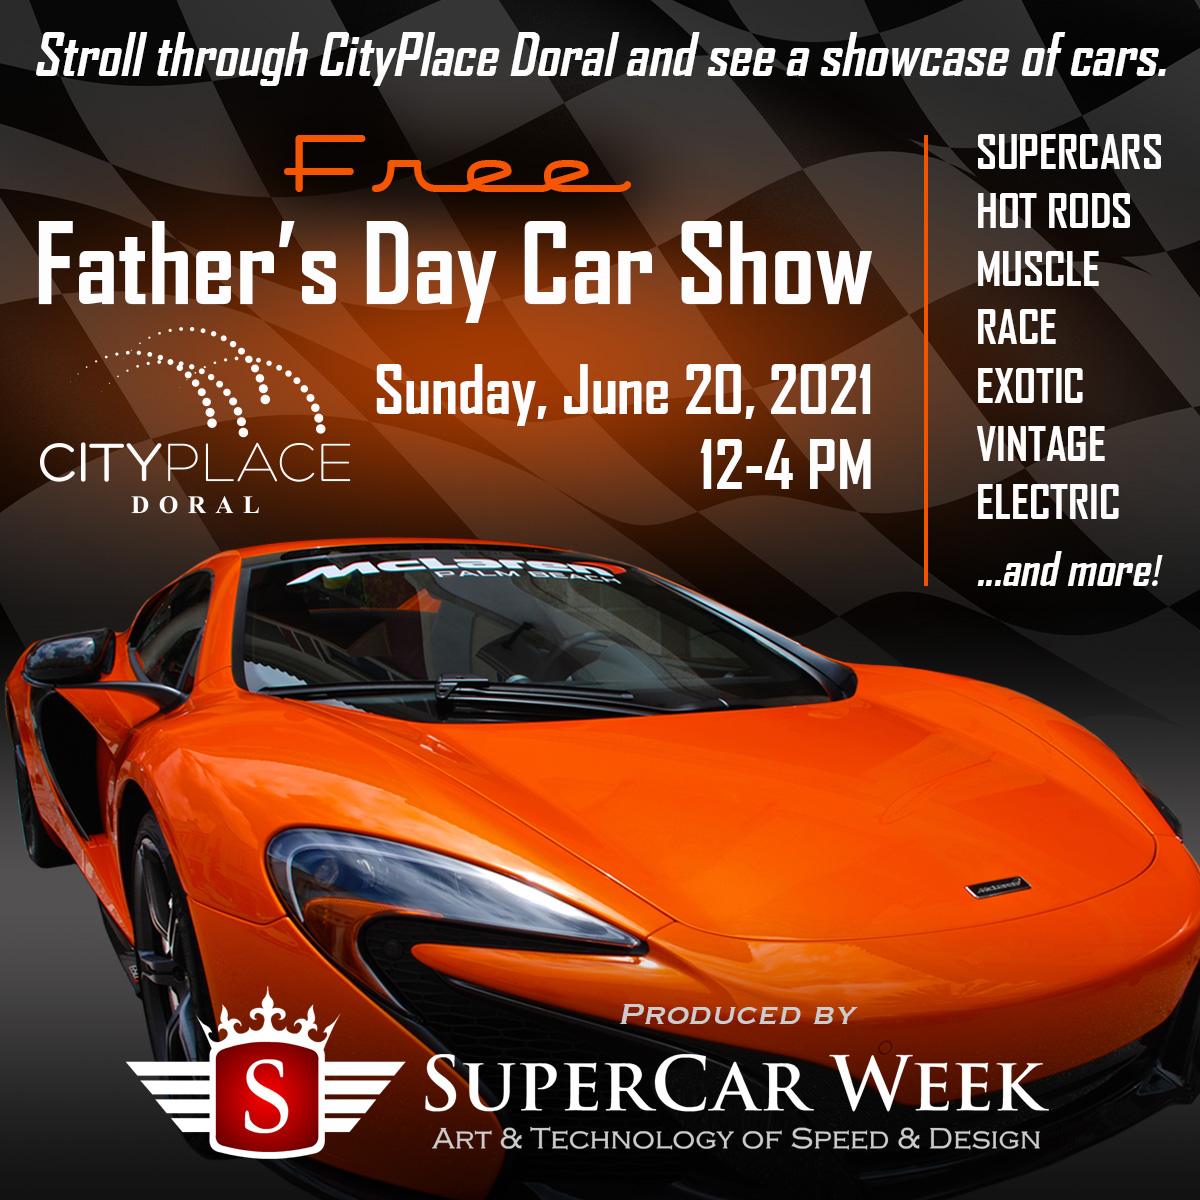 Father’s Day Car Show at CityPlace Doral 6/20/21 The Soul Of Miami